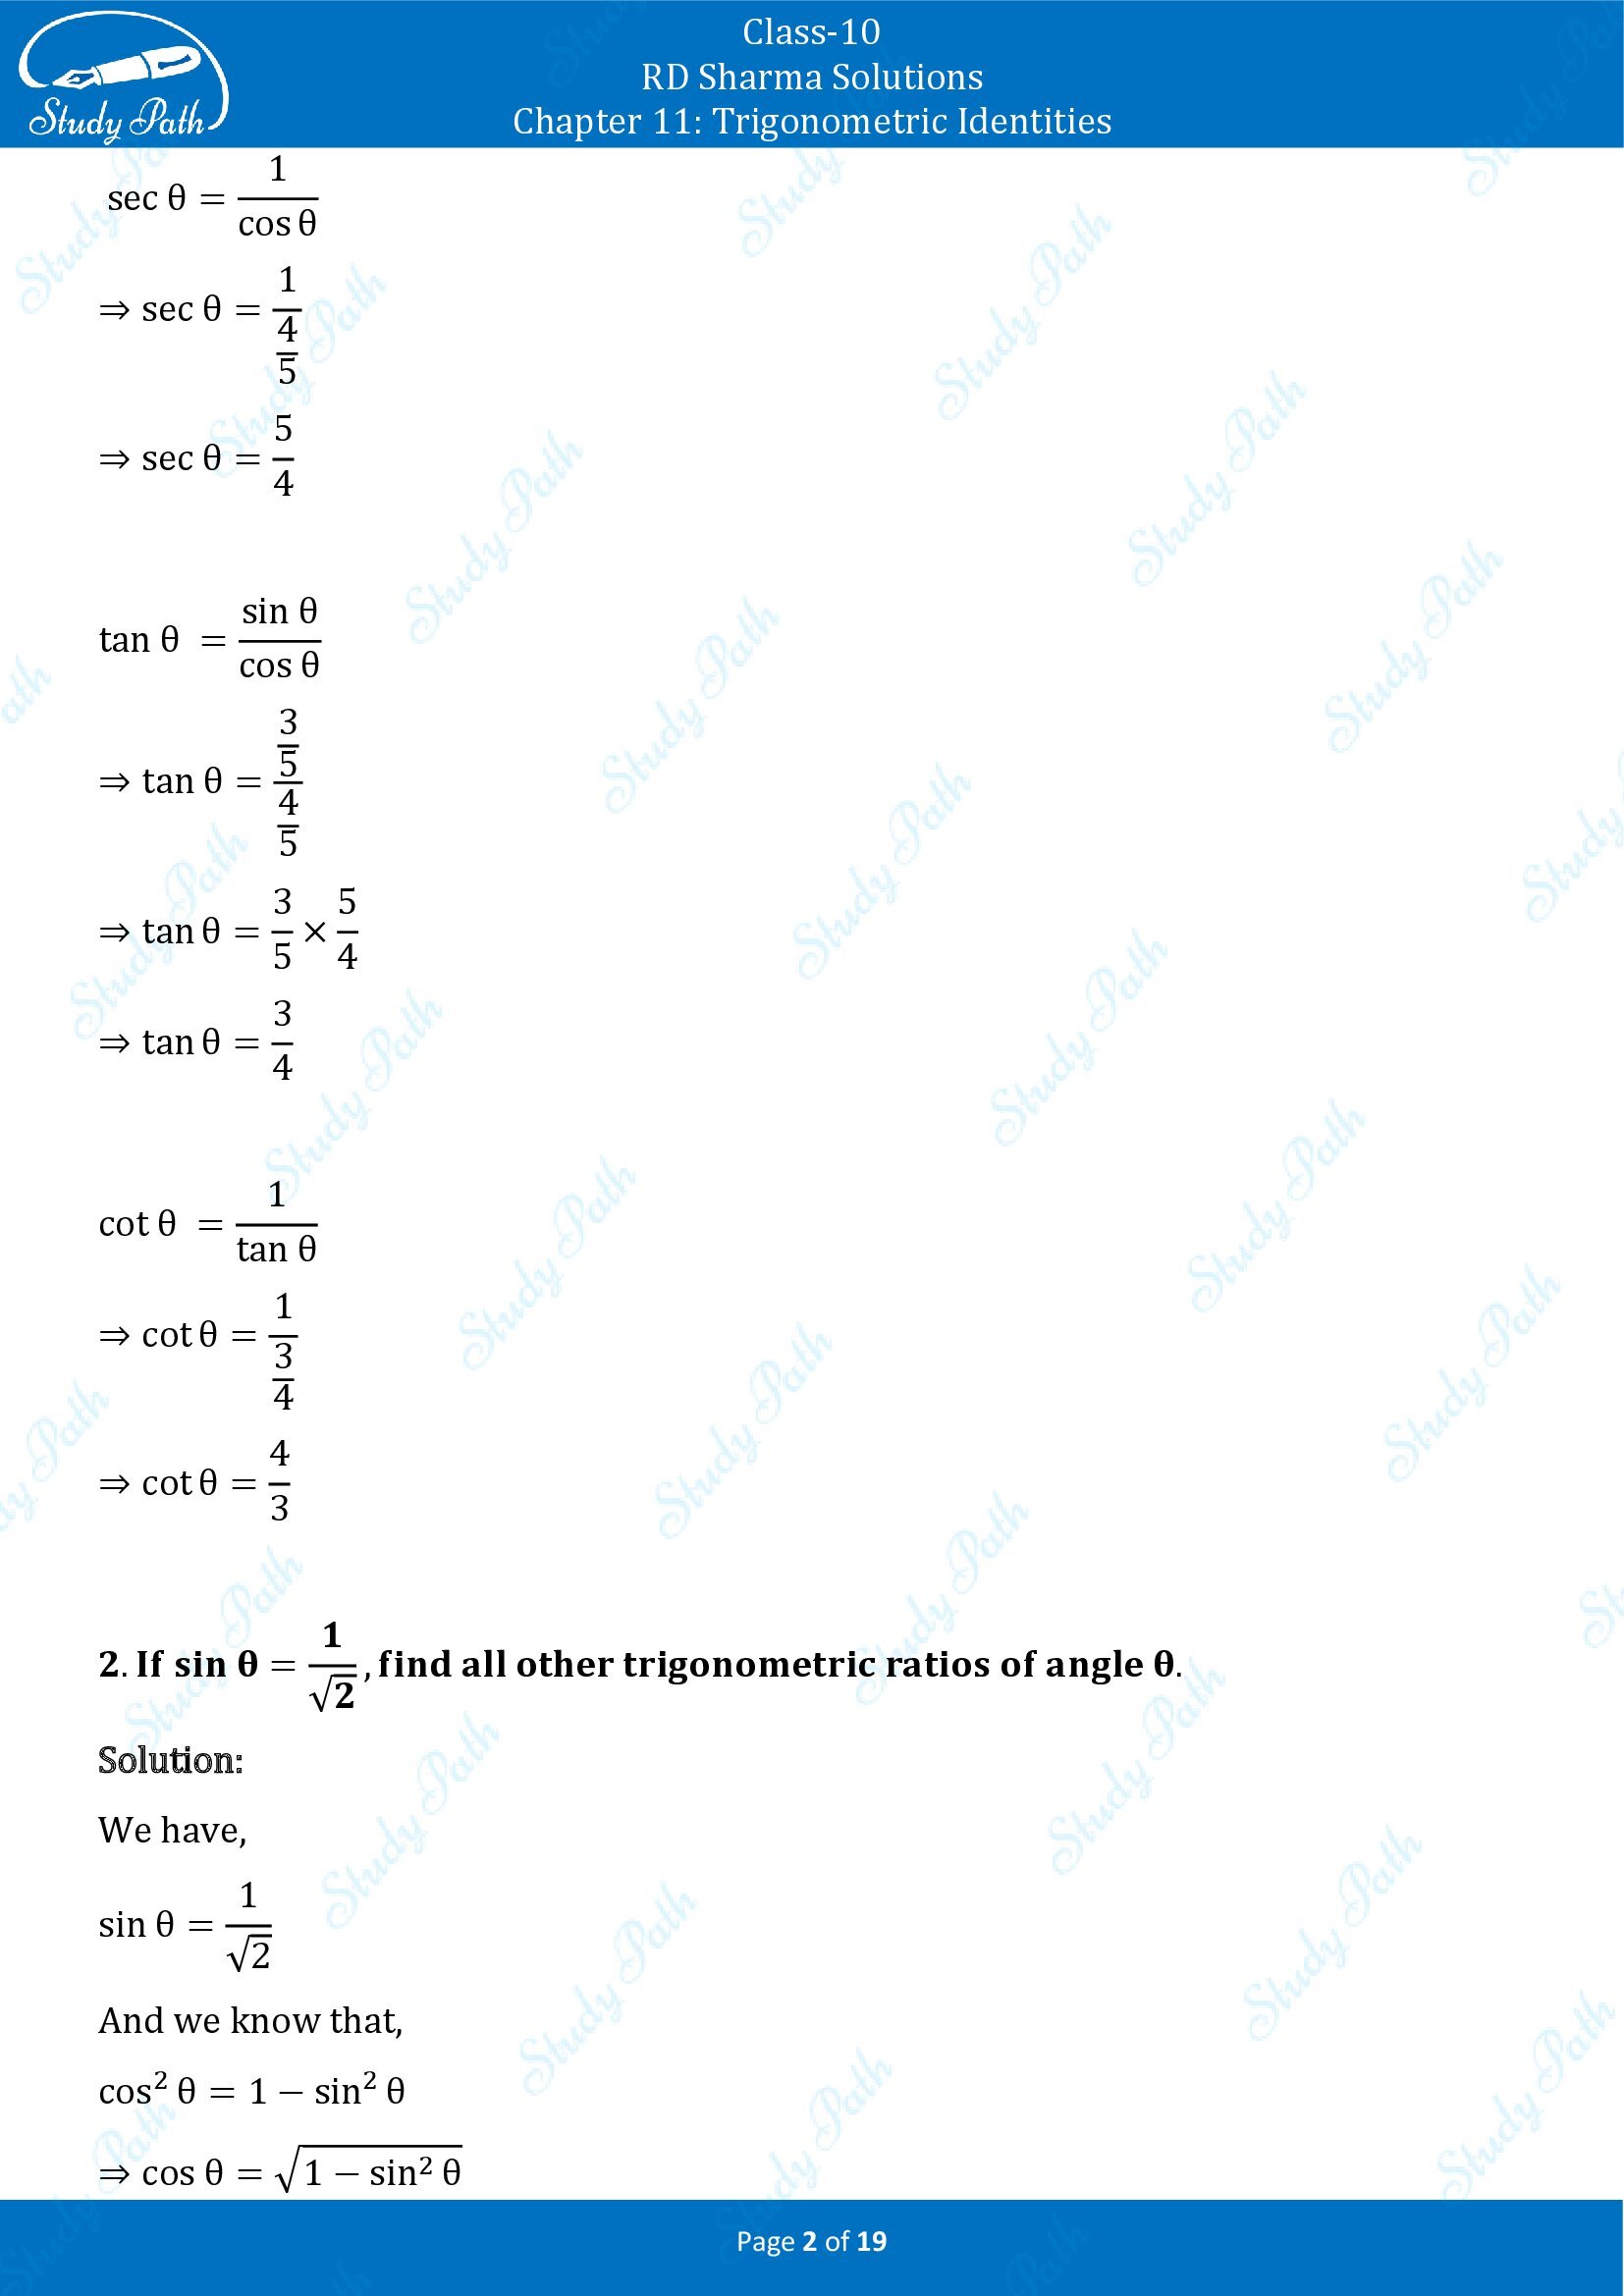 RD Sharma Solutions Class 10 Chapter 11 Trigonometric Identities Exercise 11.2 00002